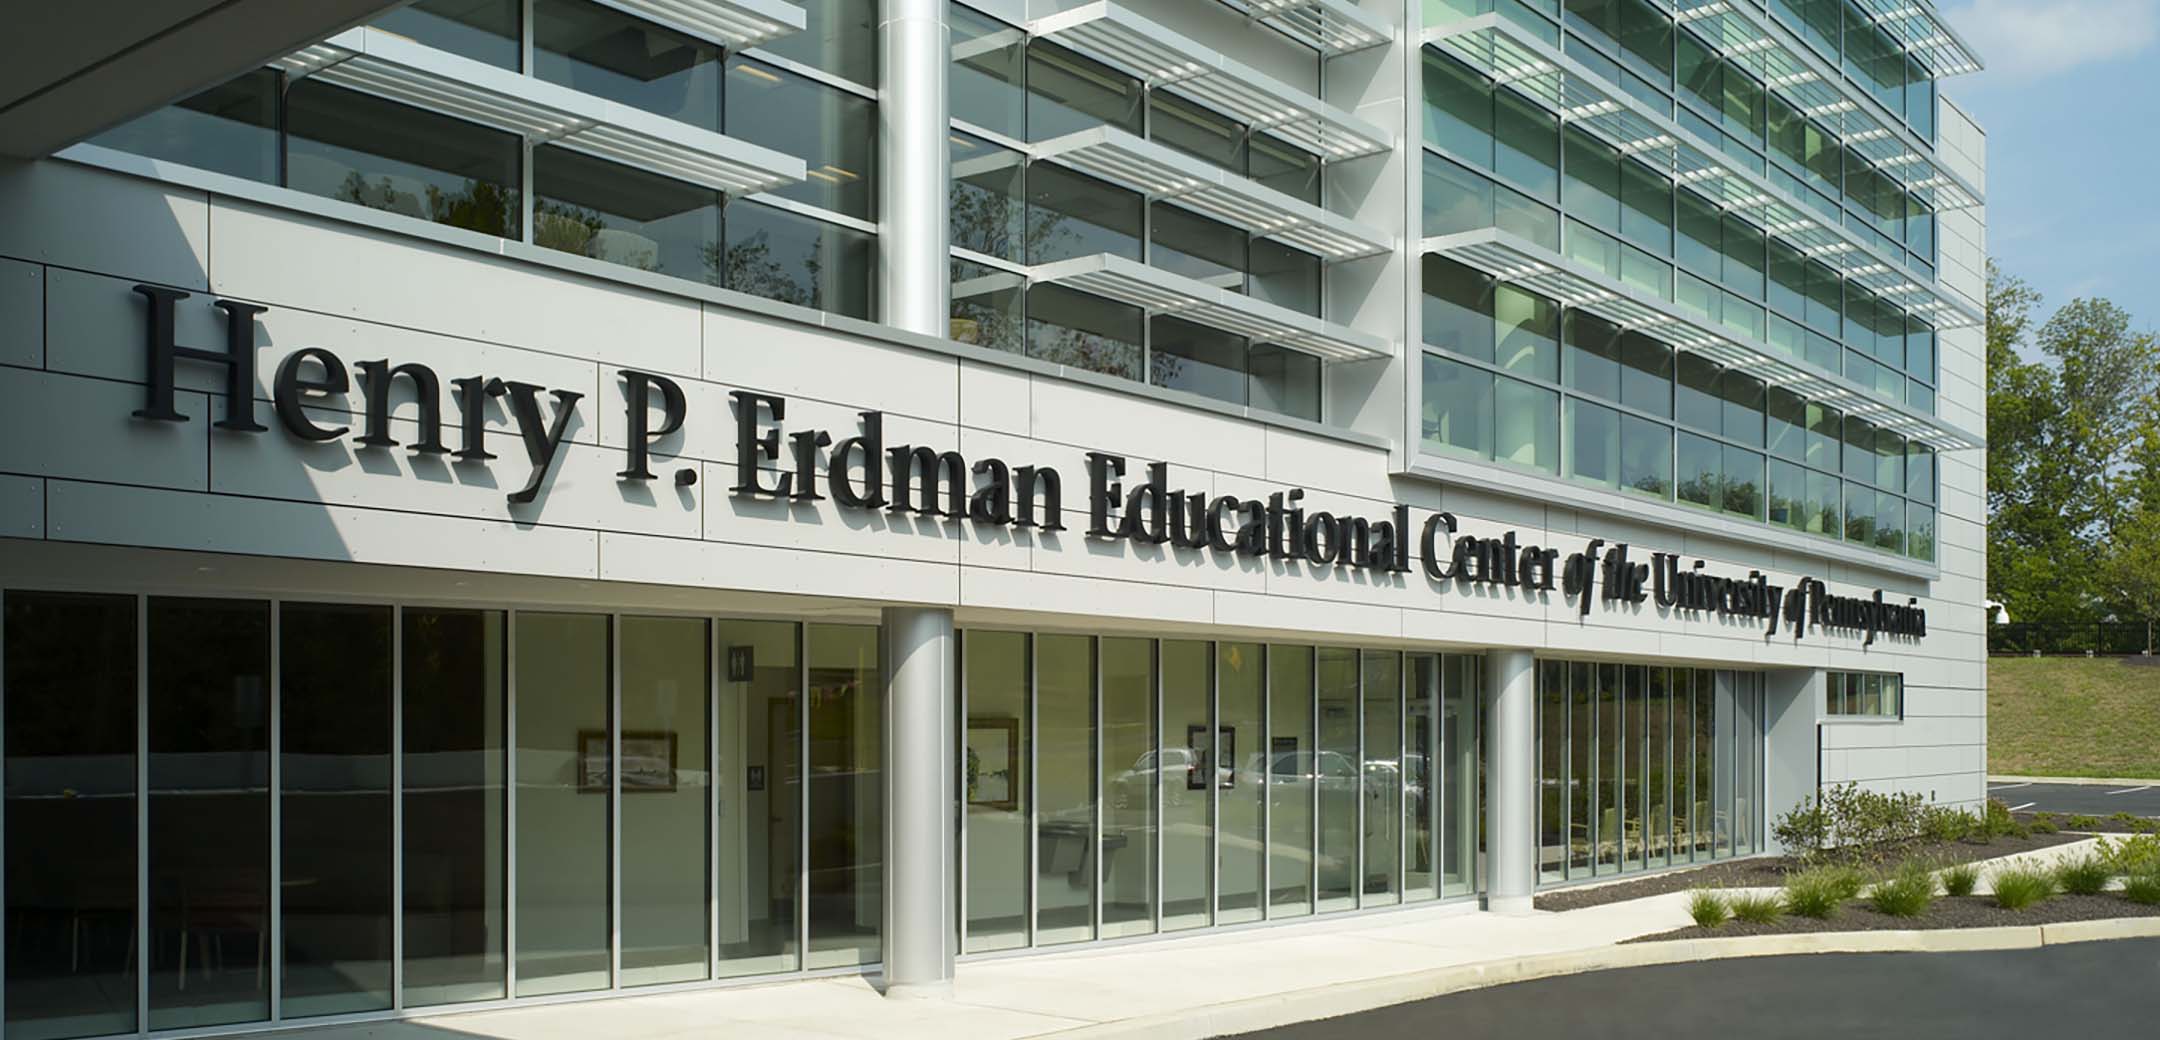 A close up image of the Pen Med VF exterior showcasing the signage saying "Henry P. Erdman Educational Center of the University of Pennsylvania".